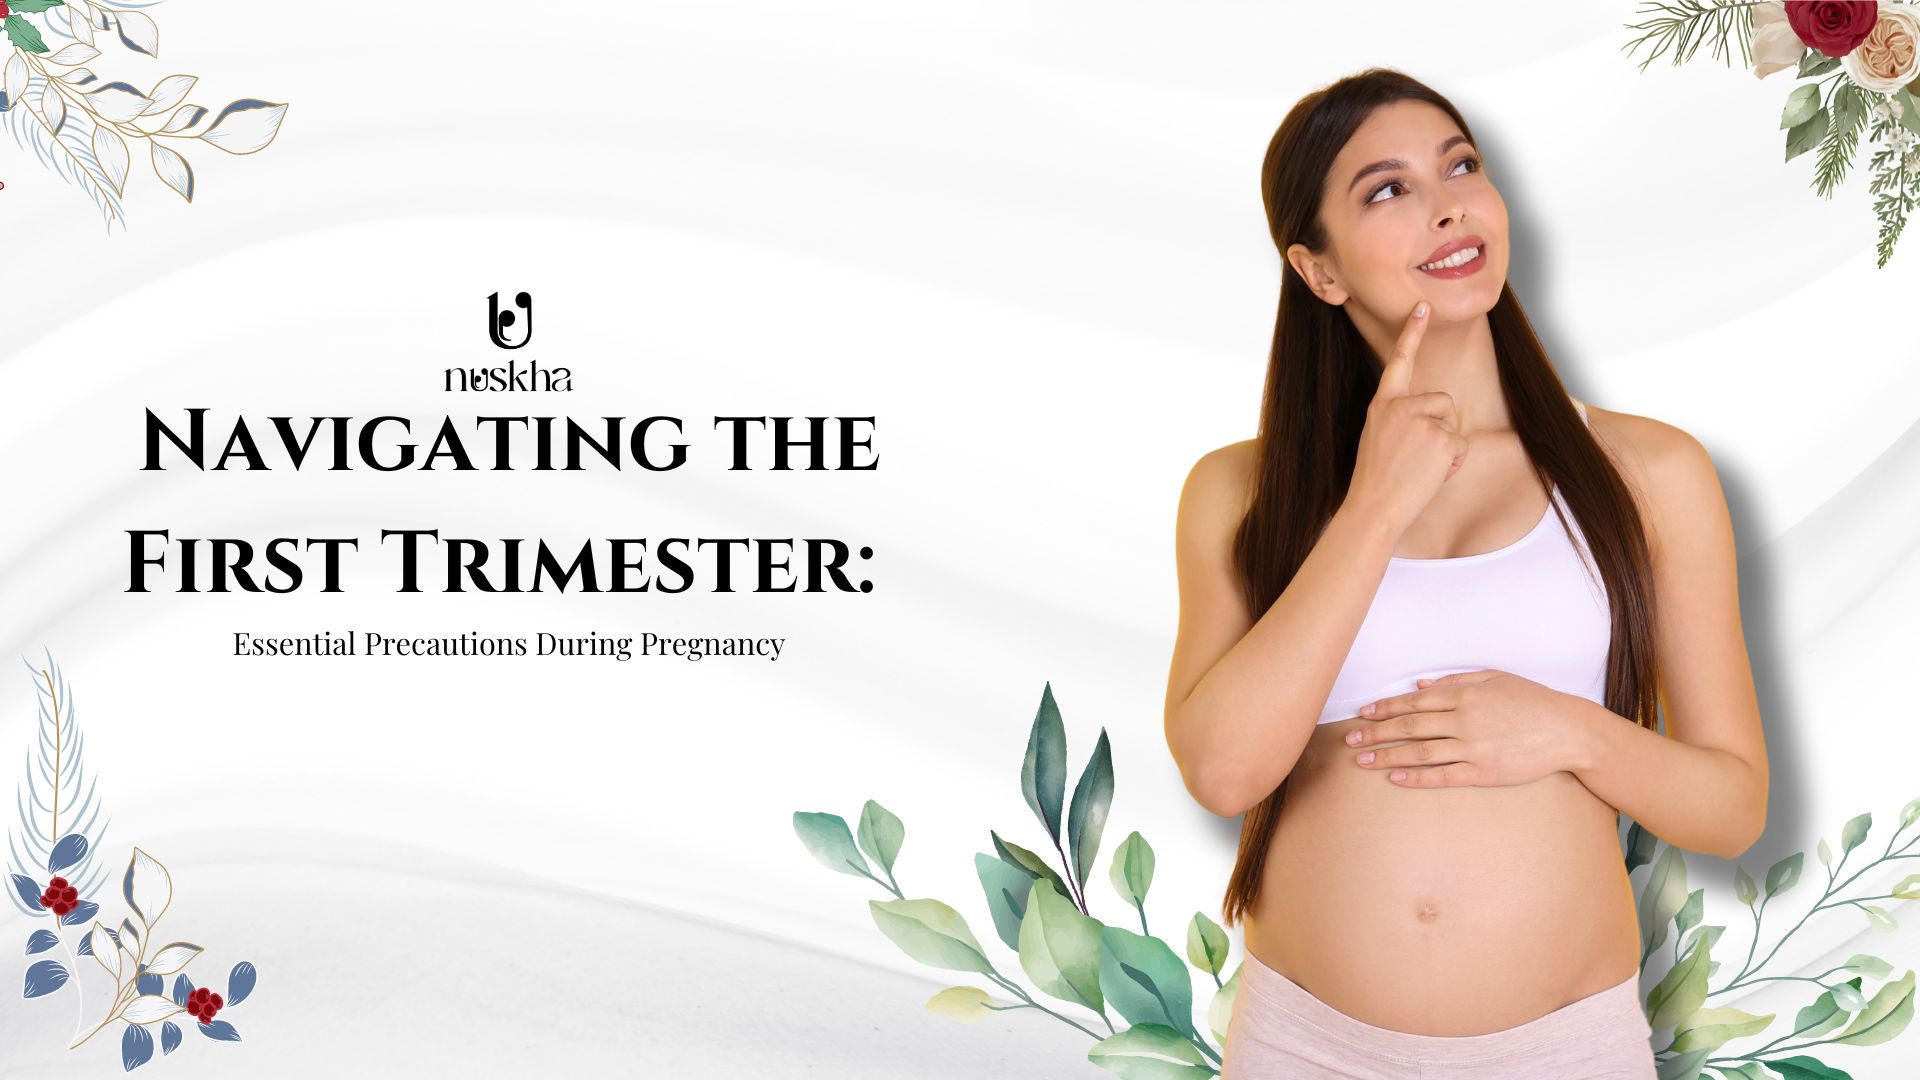 Navigating the First Trimester: Essential Precautions During Pregnancy